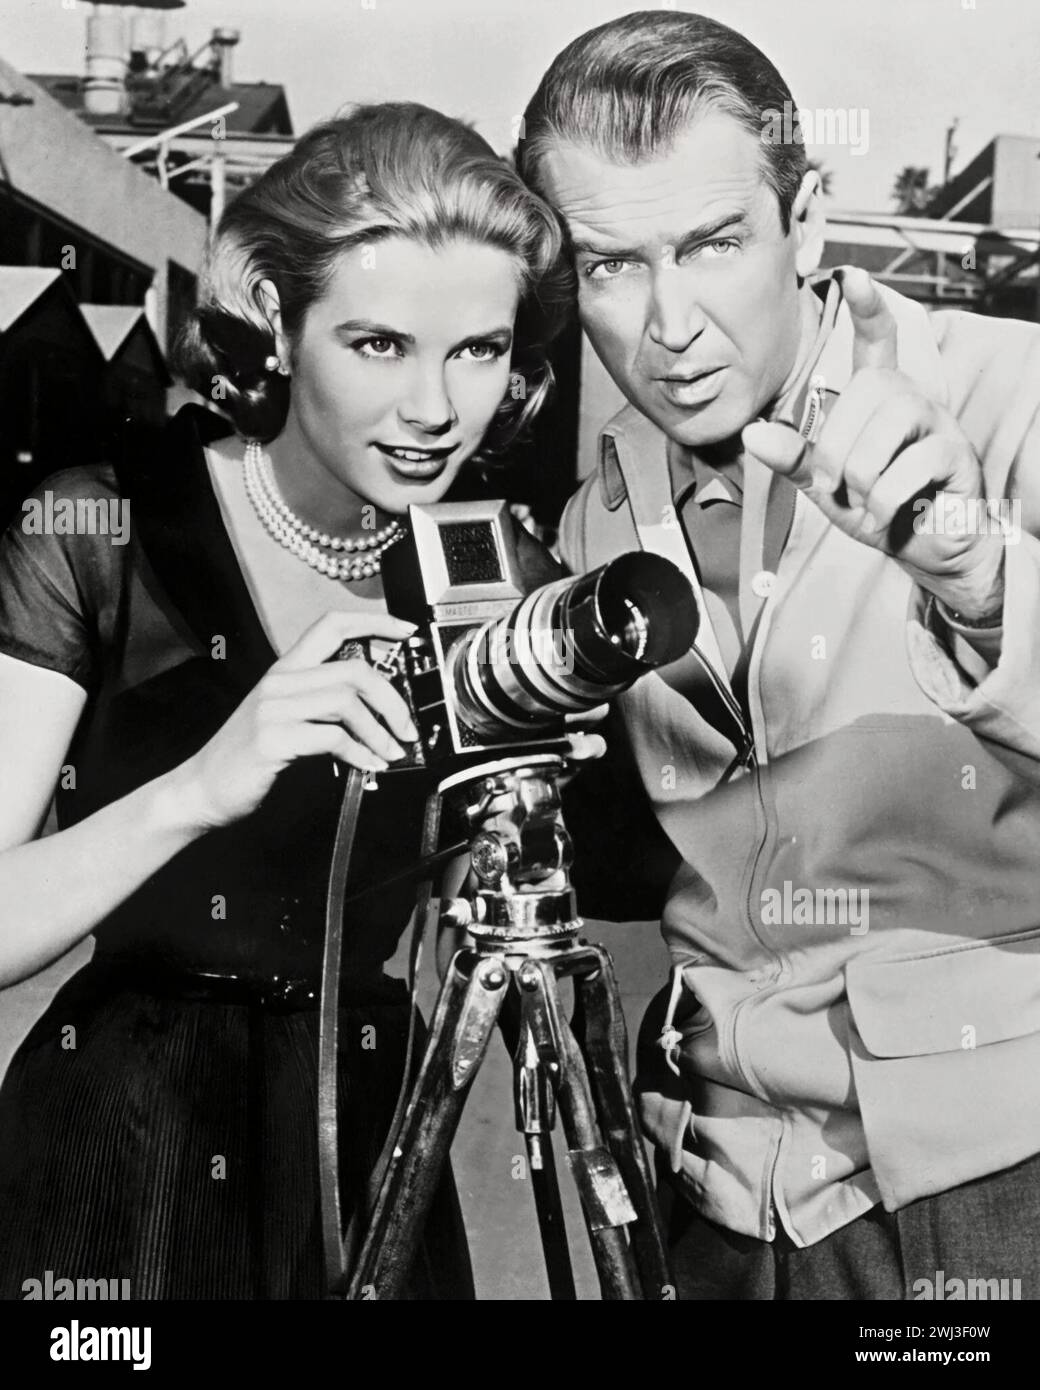 Grace Kelly and James Stewart with a camera - Publicity Photo for the Alfred Hitchcock directed film Rear Window, 1954 Stock Photo